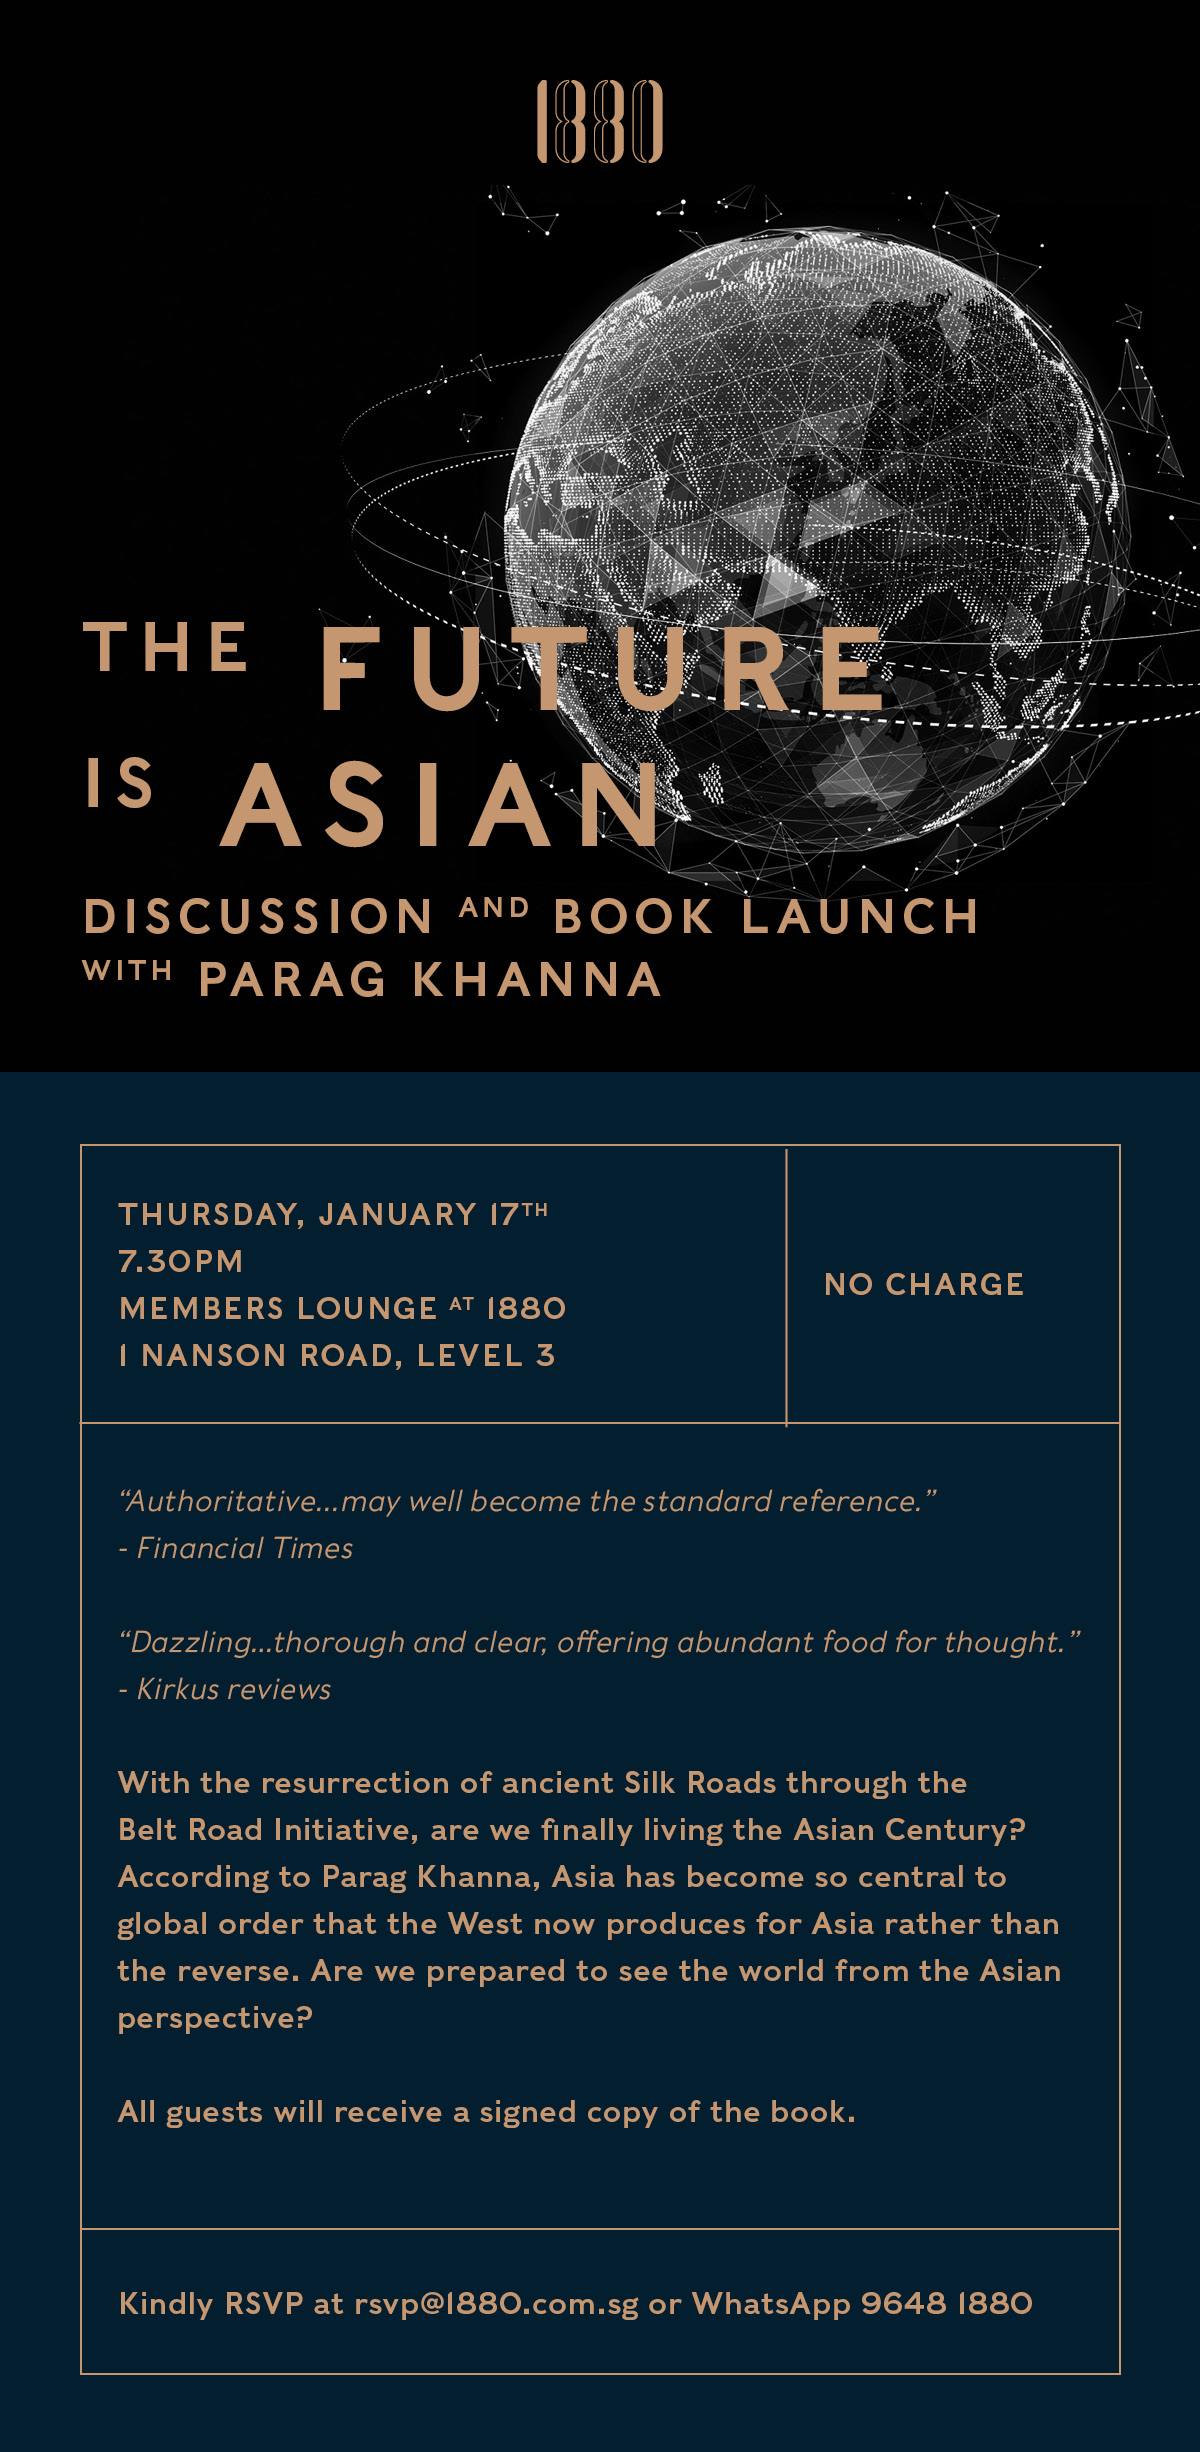 The Future Is Asian: Discussion and Book Launch with Parag Khanna